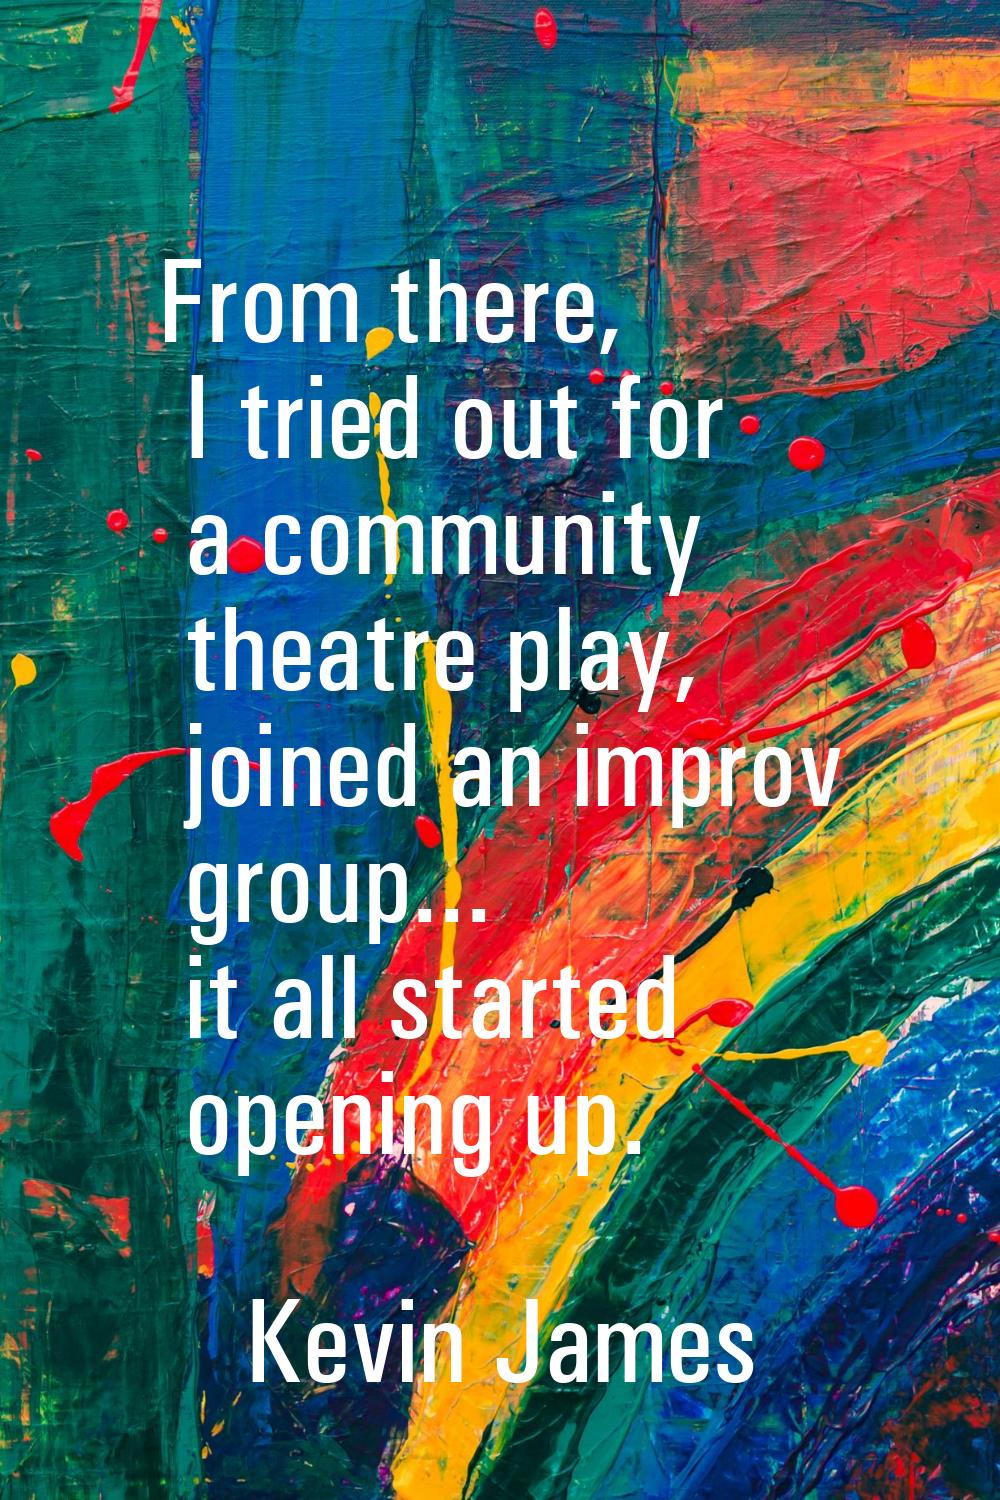 From there, I tried out for a community theatre play, joined an improv group... it all started open